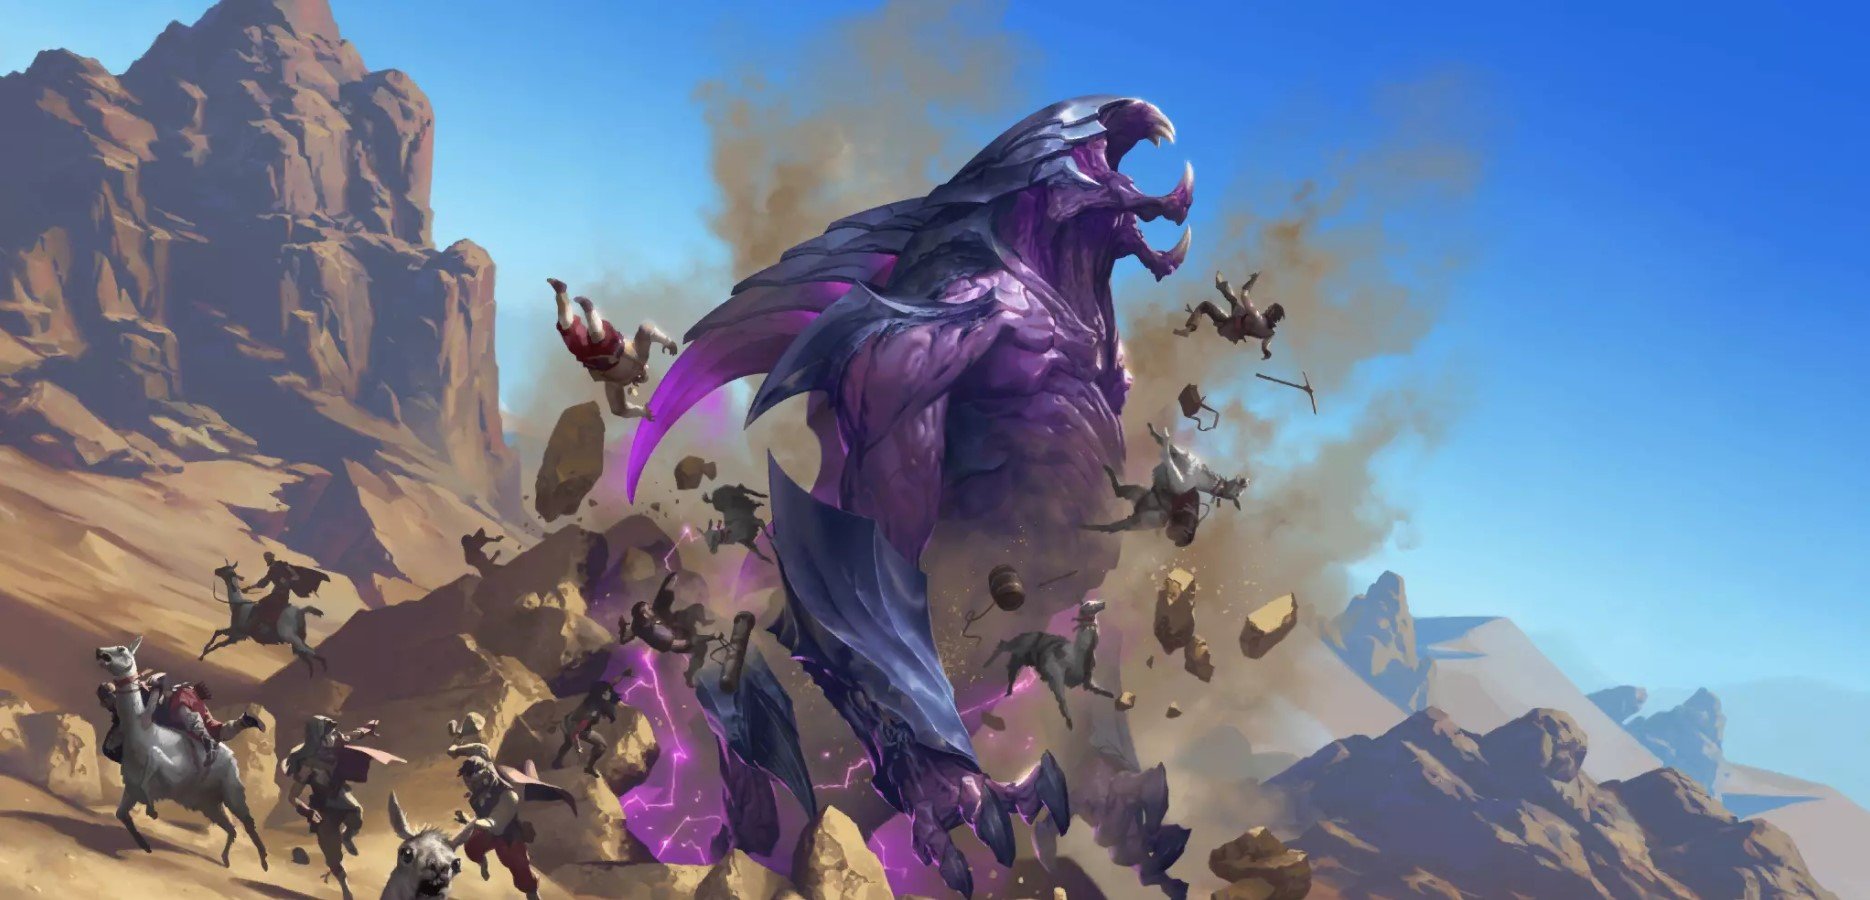 10+ Rek'Sai (League Of Legends) HD Wallpapers and Backgrounds